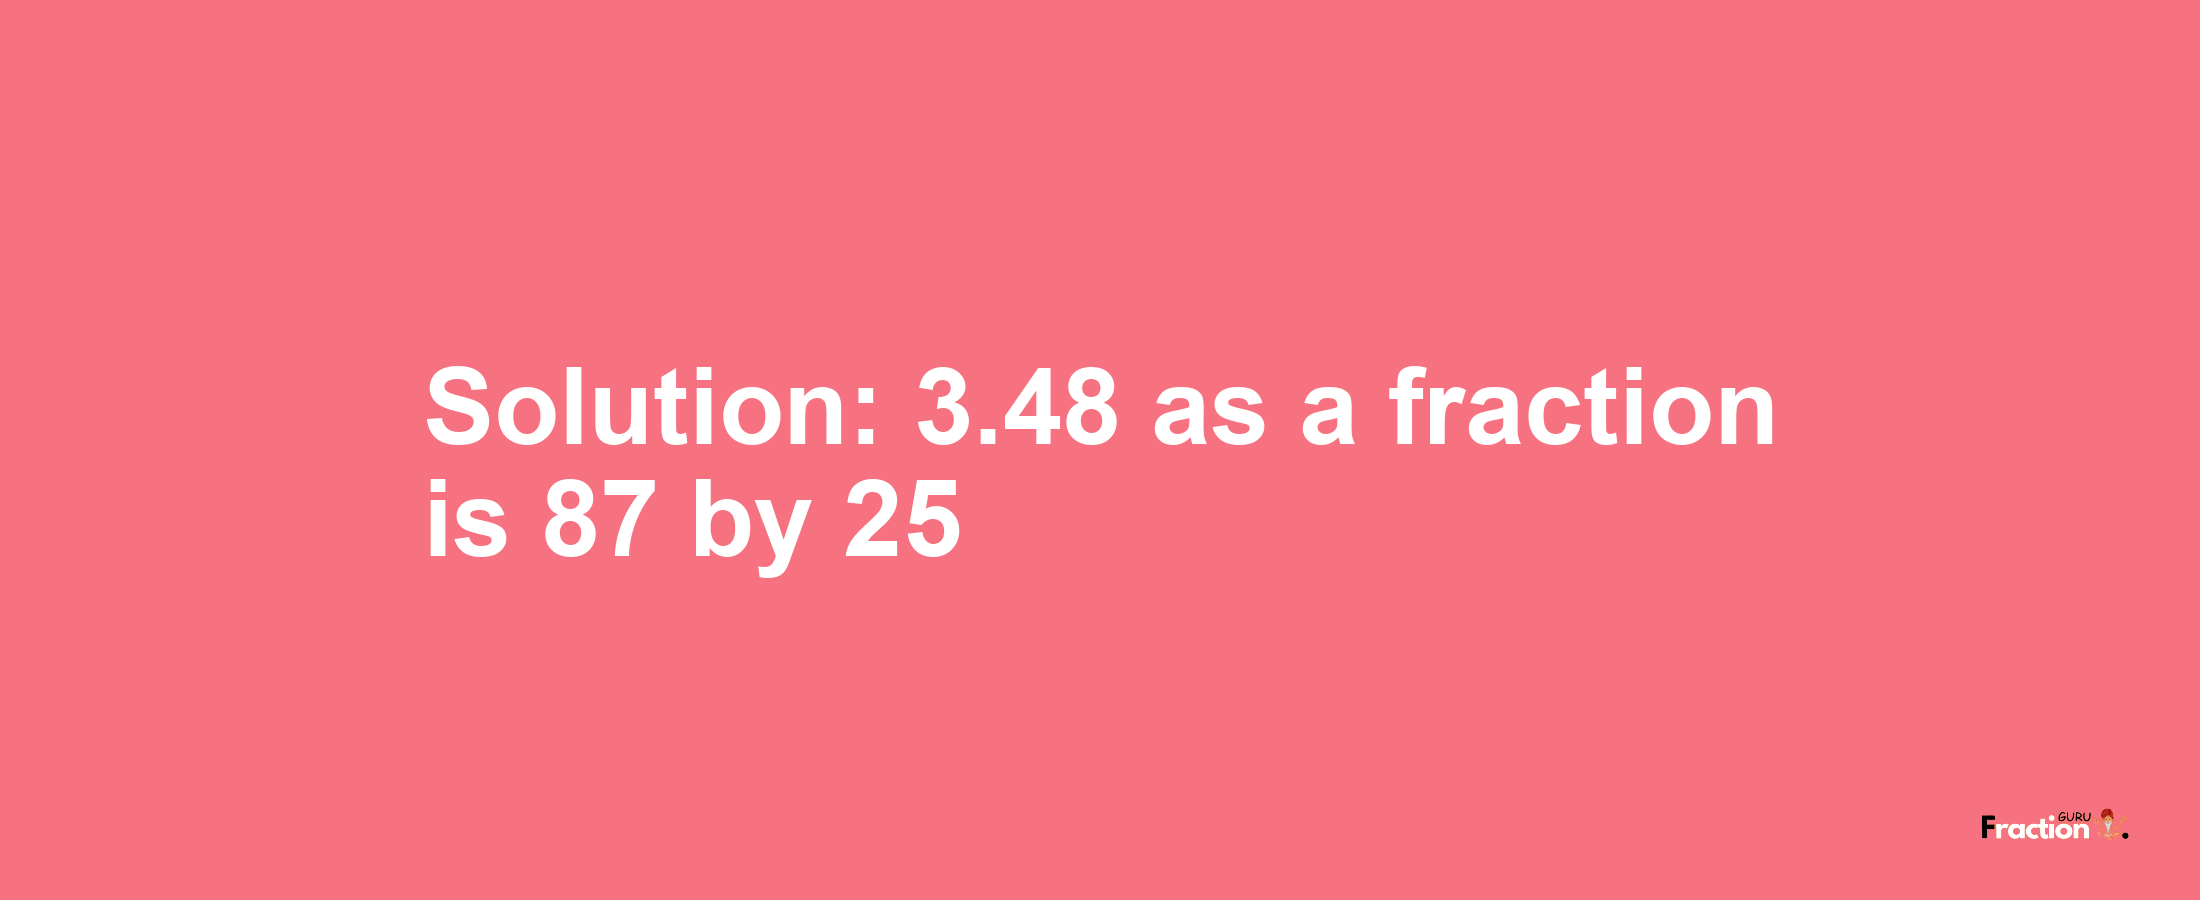 Solution:3.48 as a fraction is 87/25